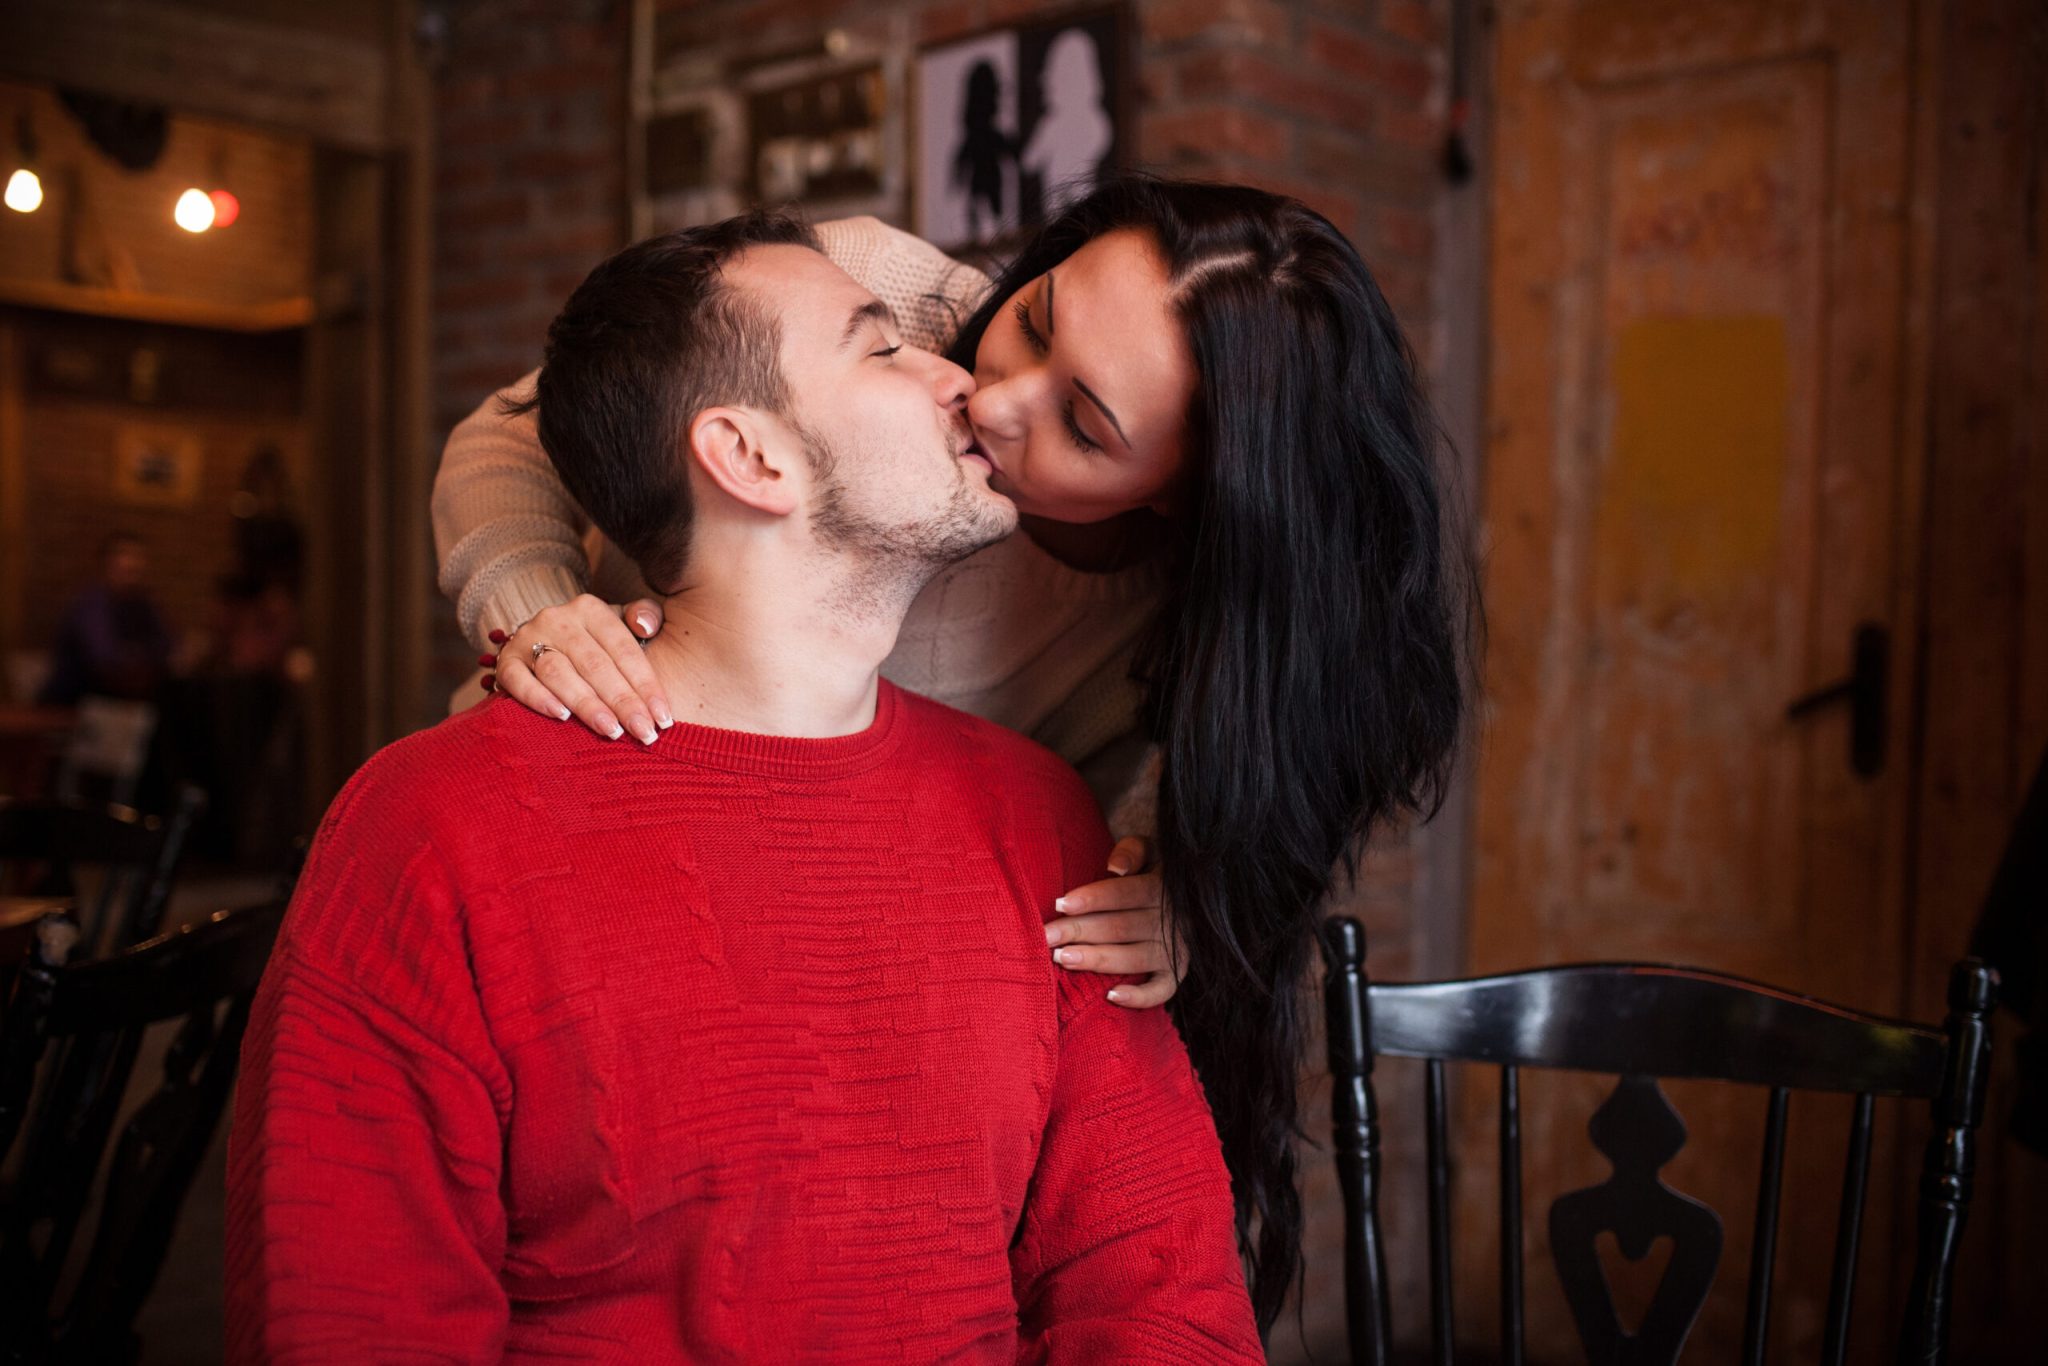 girl-kissing-man-cafe-scaled-1-2048x1366